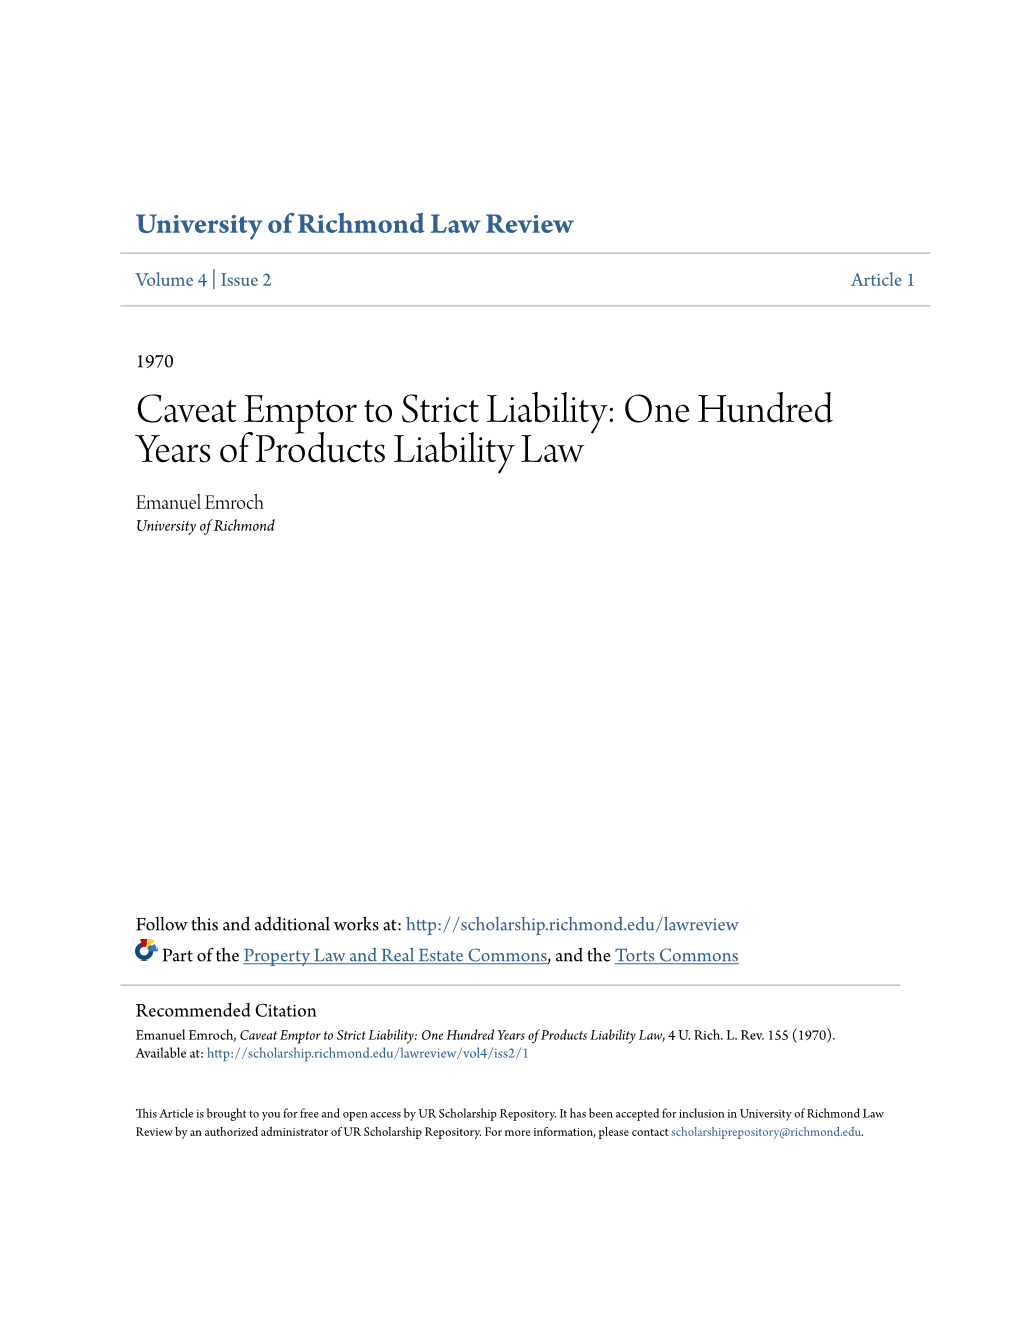 Caveat Emptor to Strict Liability: One Hundred Years of Products Liability Law Emanuel Emroch University of Richmond